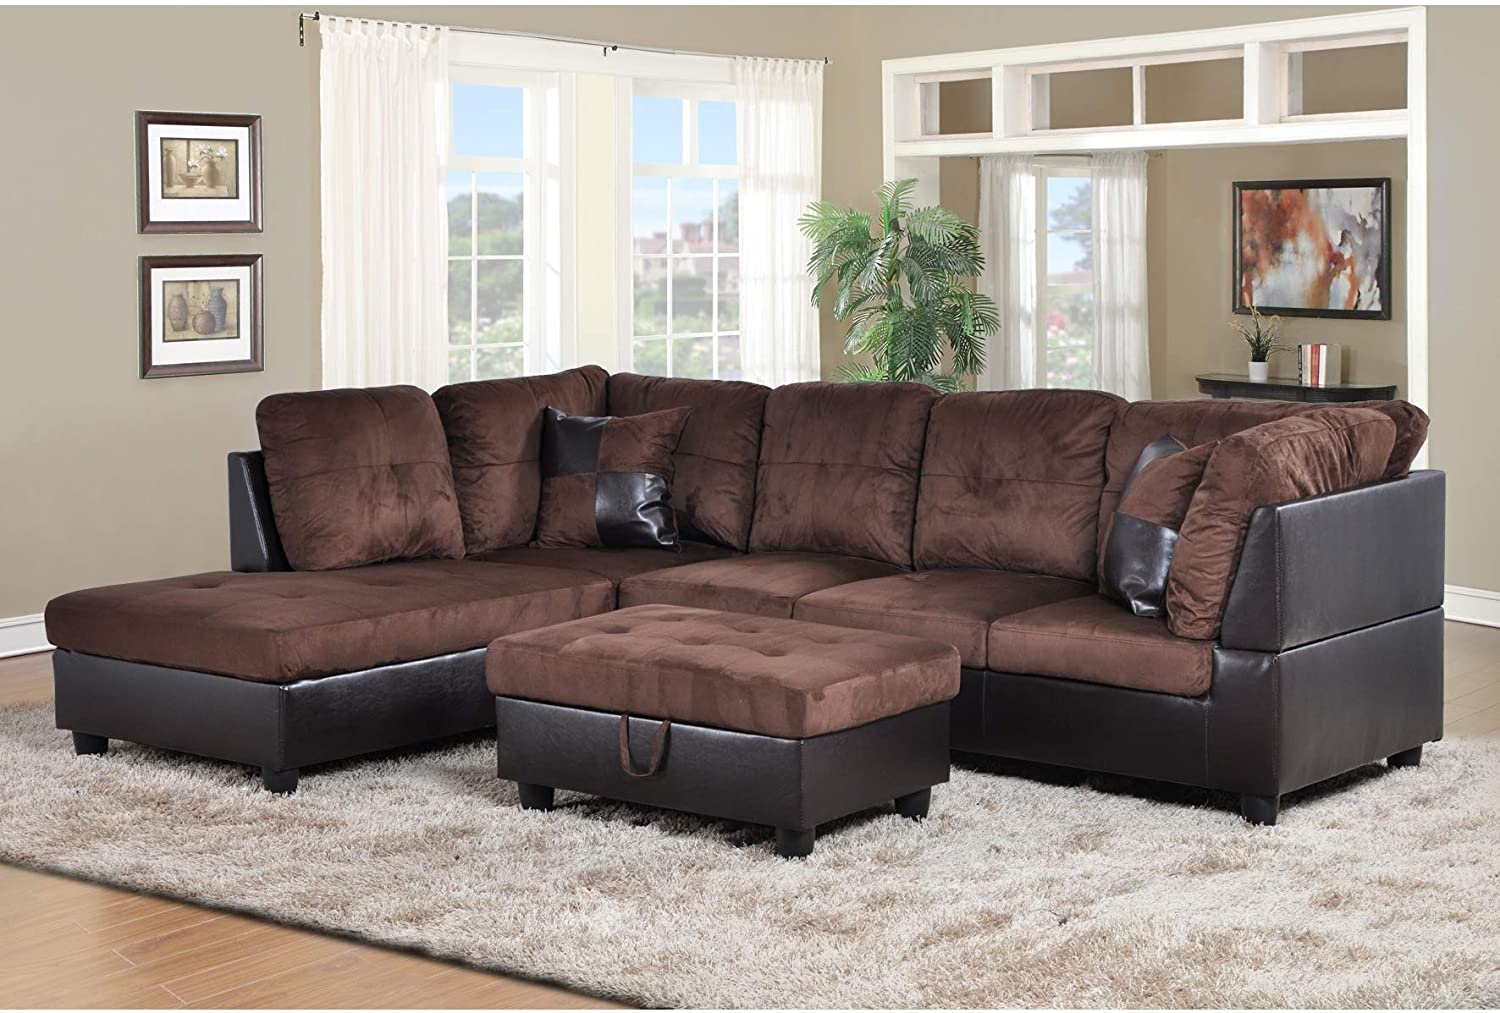 Ashley Furniture Couch Prices / Ashley Furniture: Showroom | Sectional